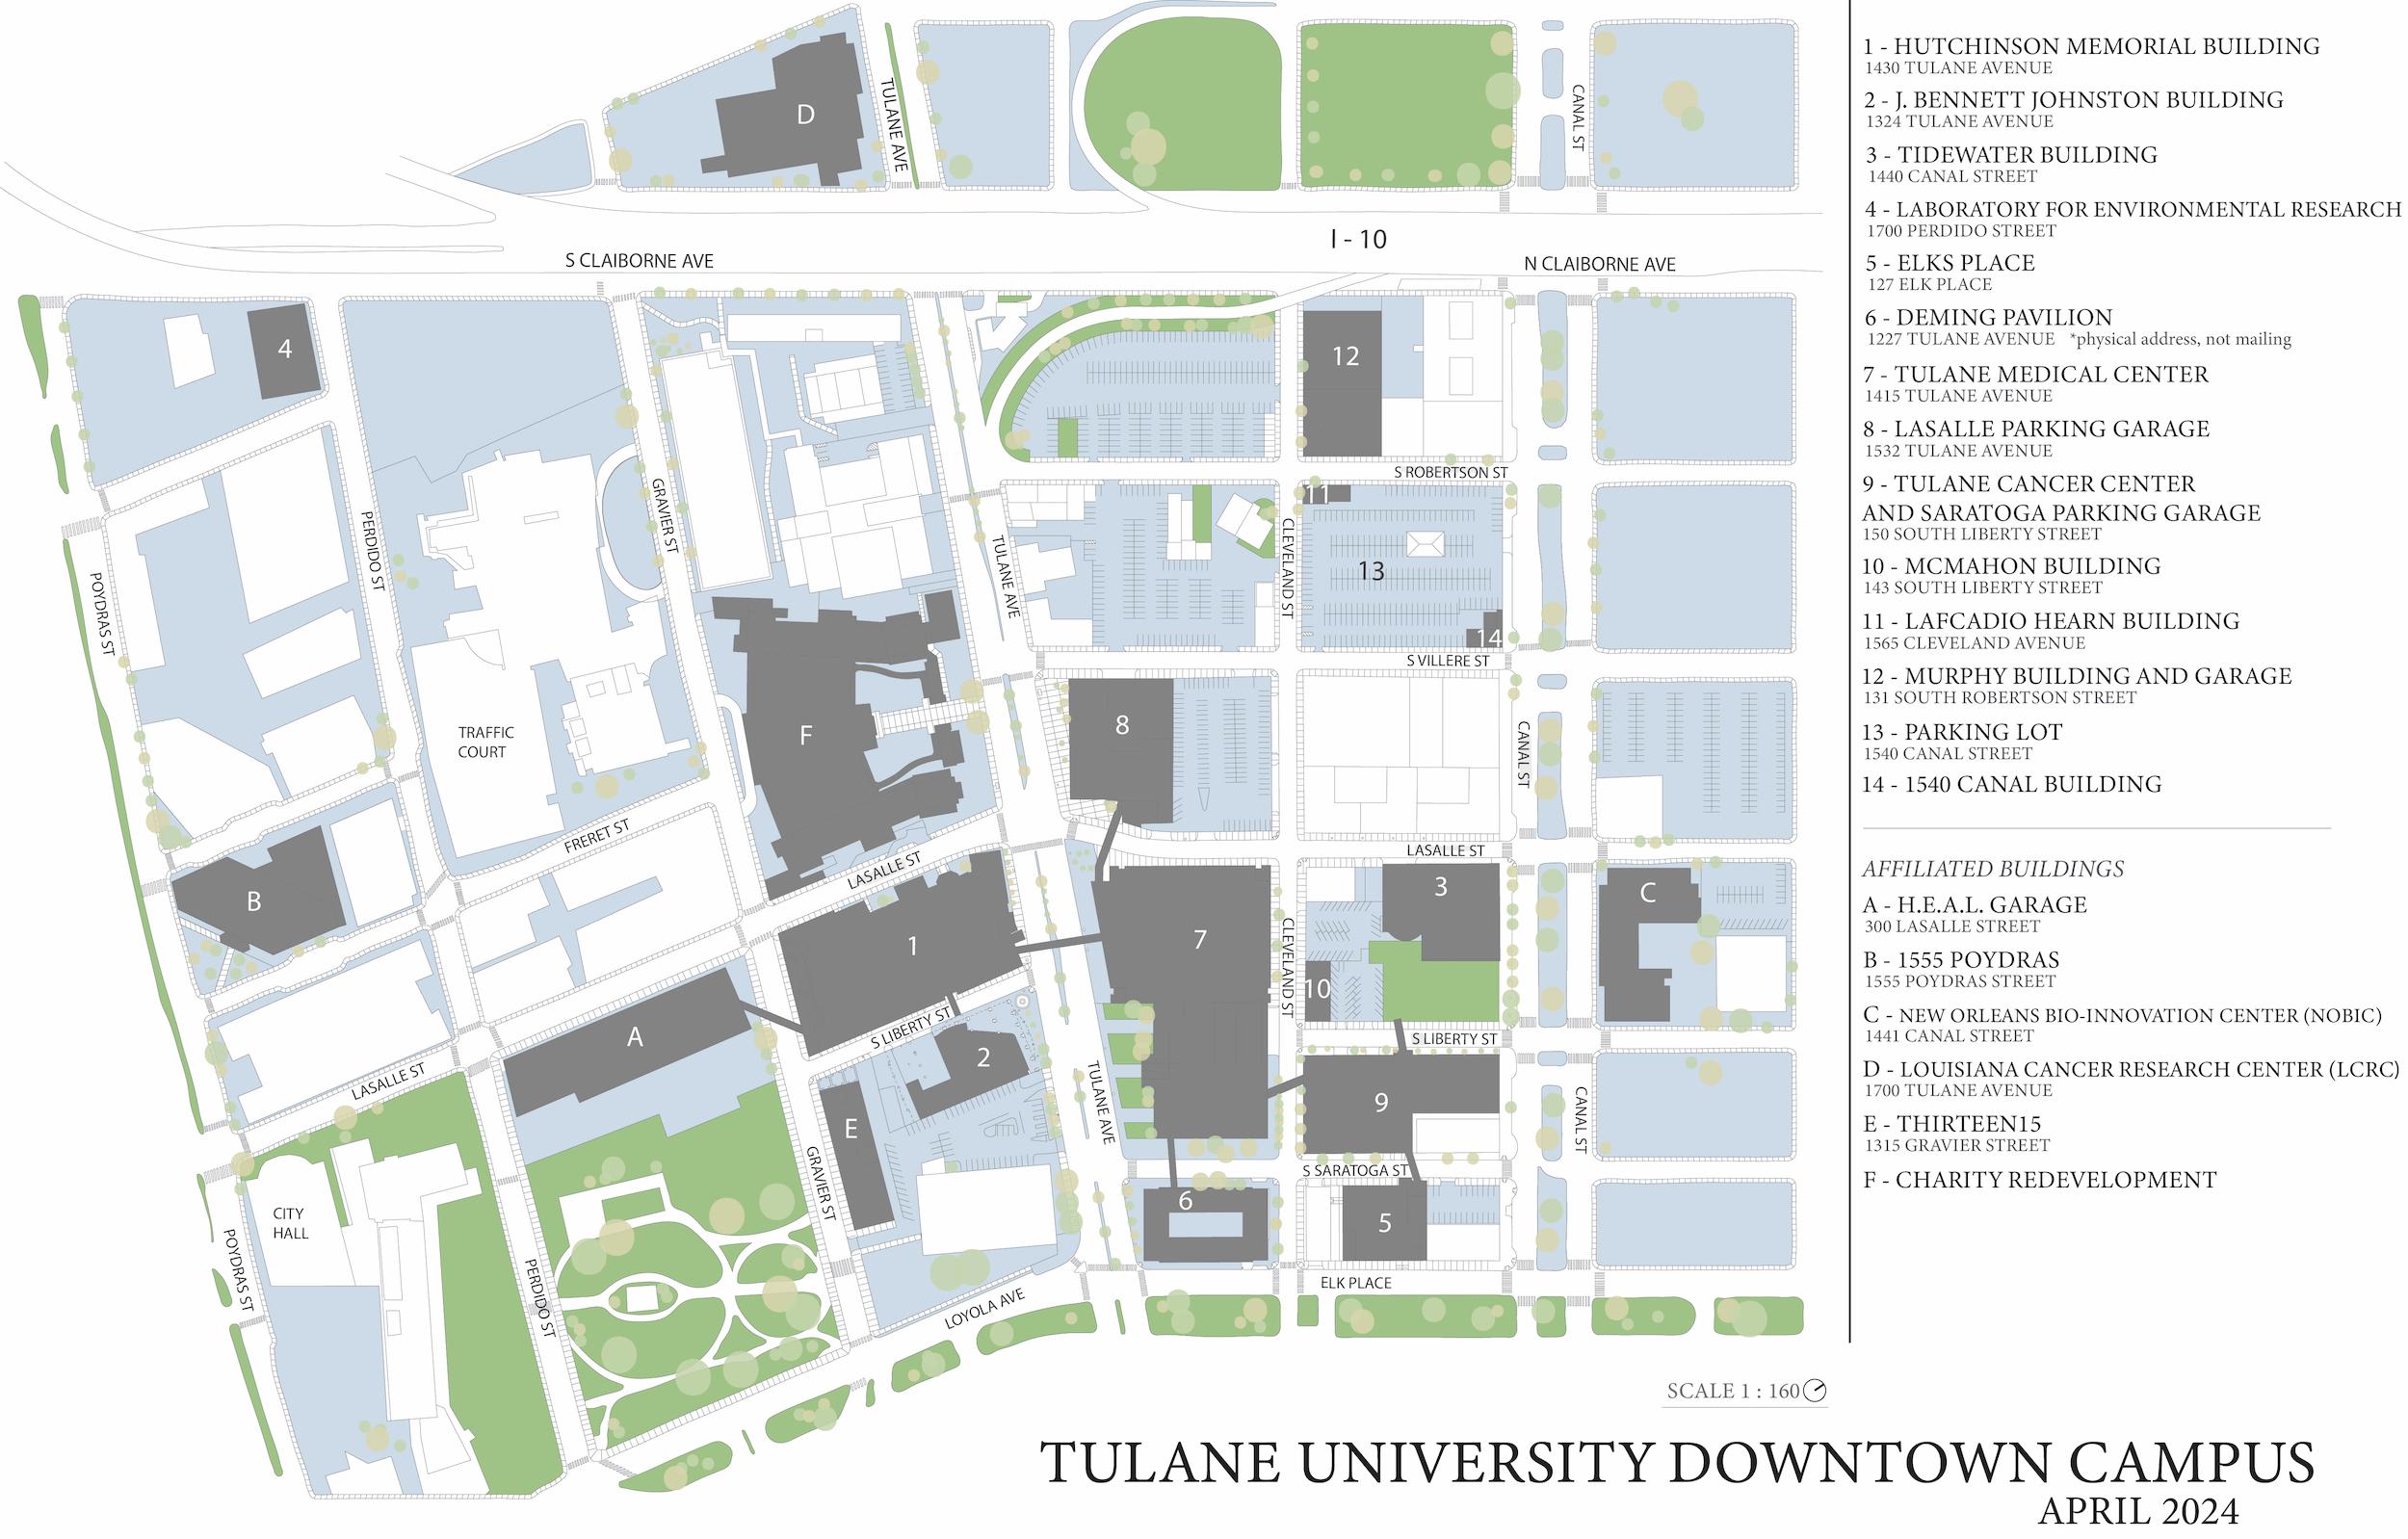 This is a map of Tulane's downtown campus